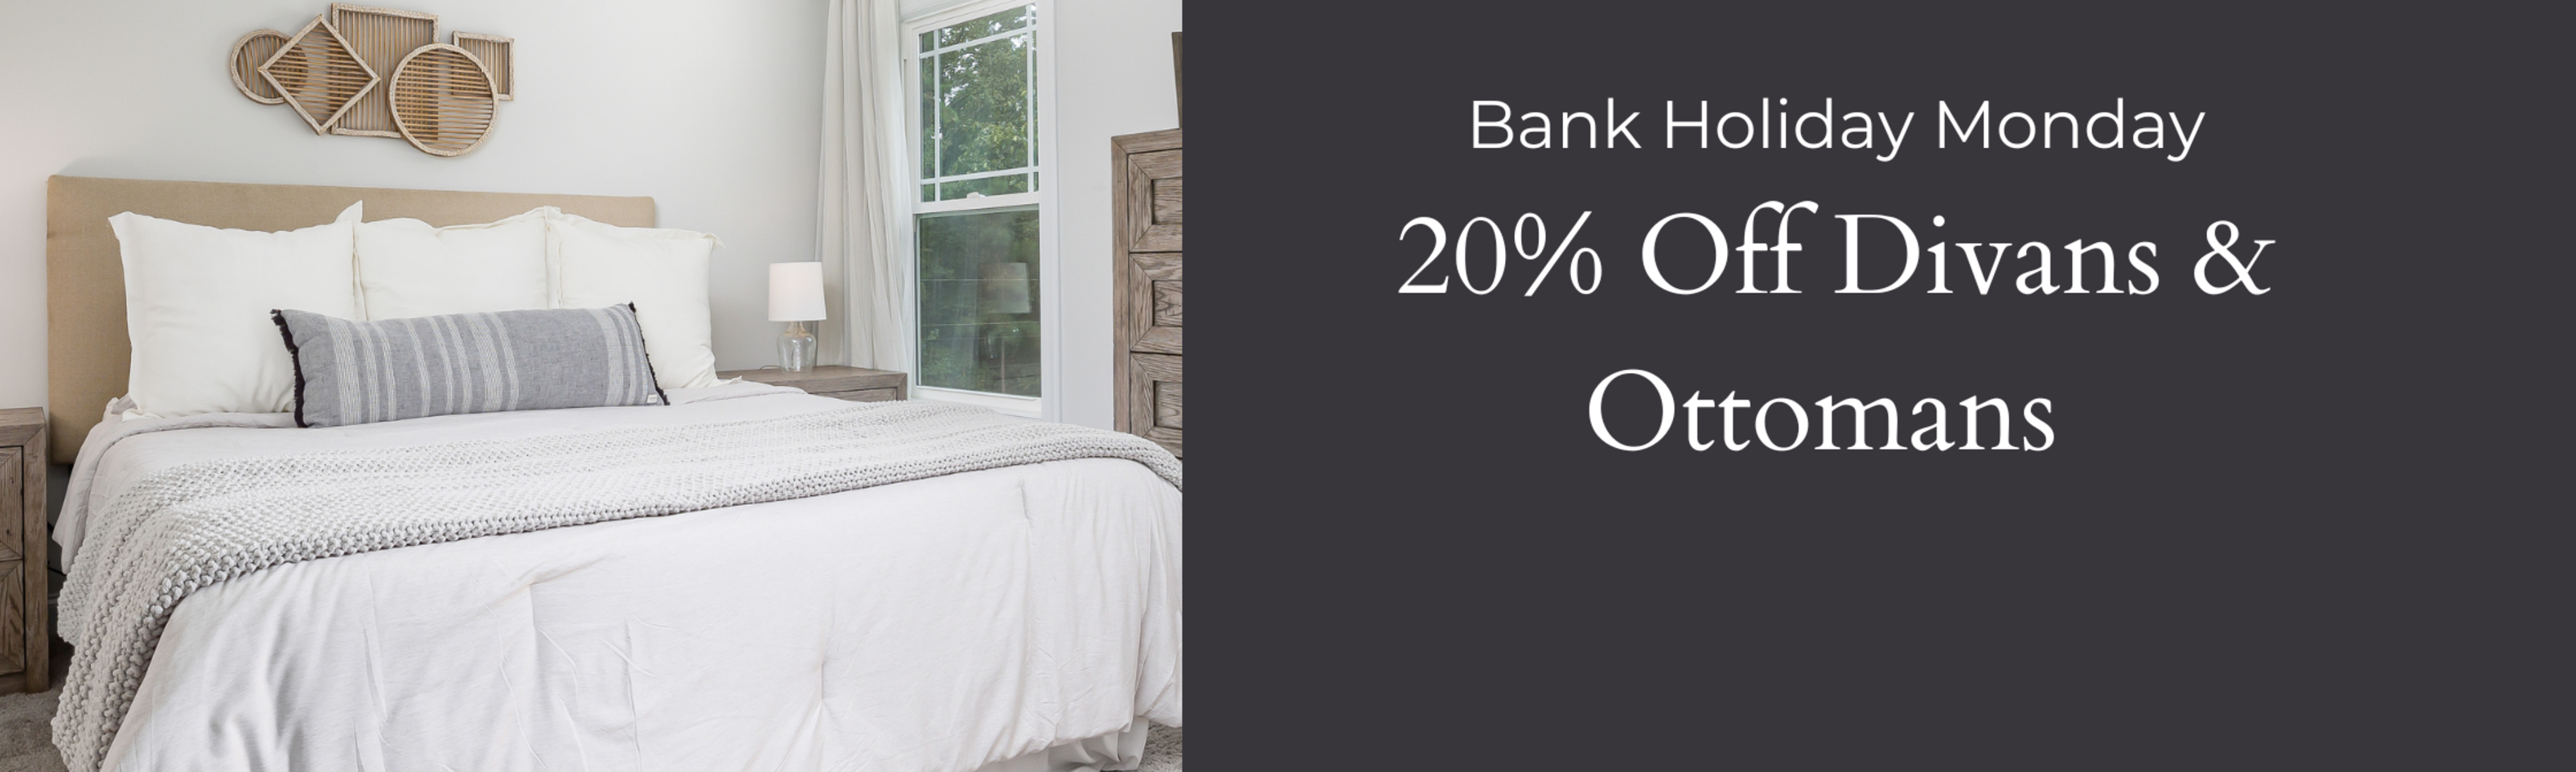 August Bank Holiday Monday Bed Sale